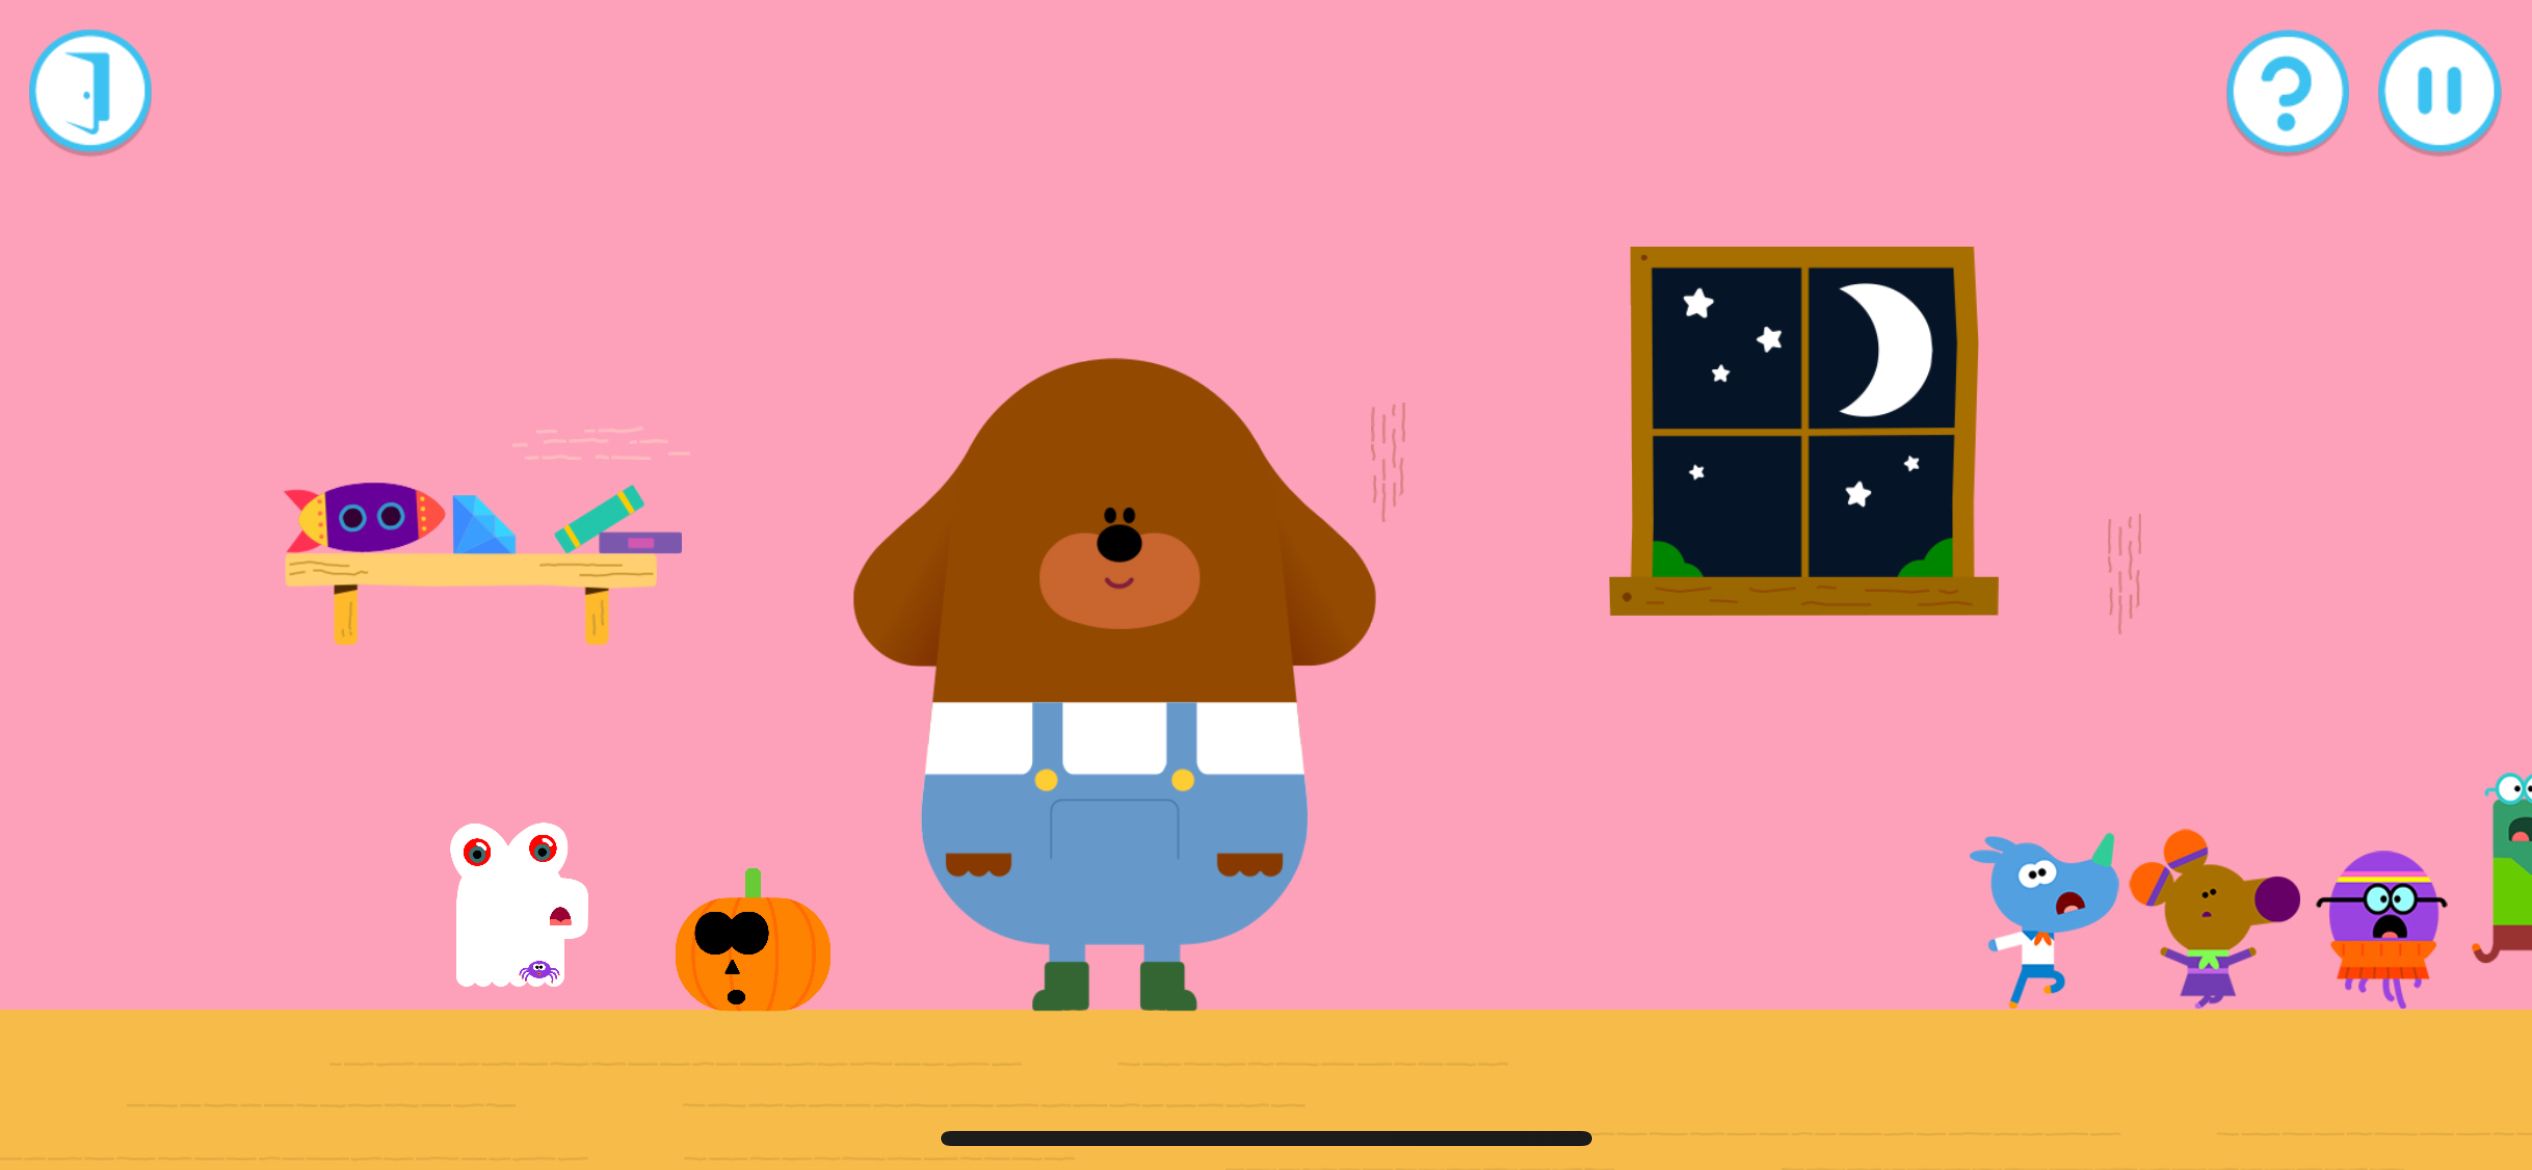 Hey Duggee Spooky Badge App Screenshot, showing all the characters